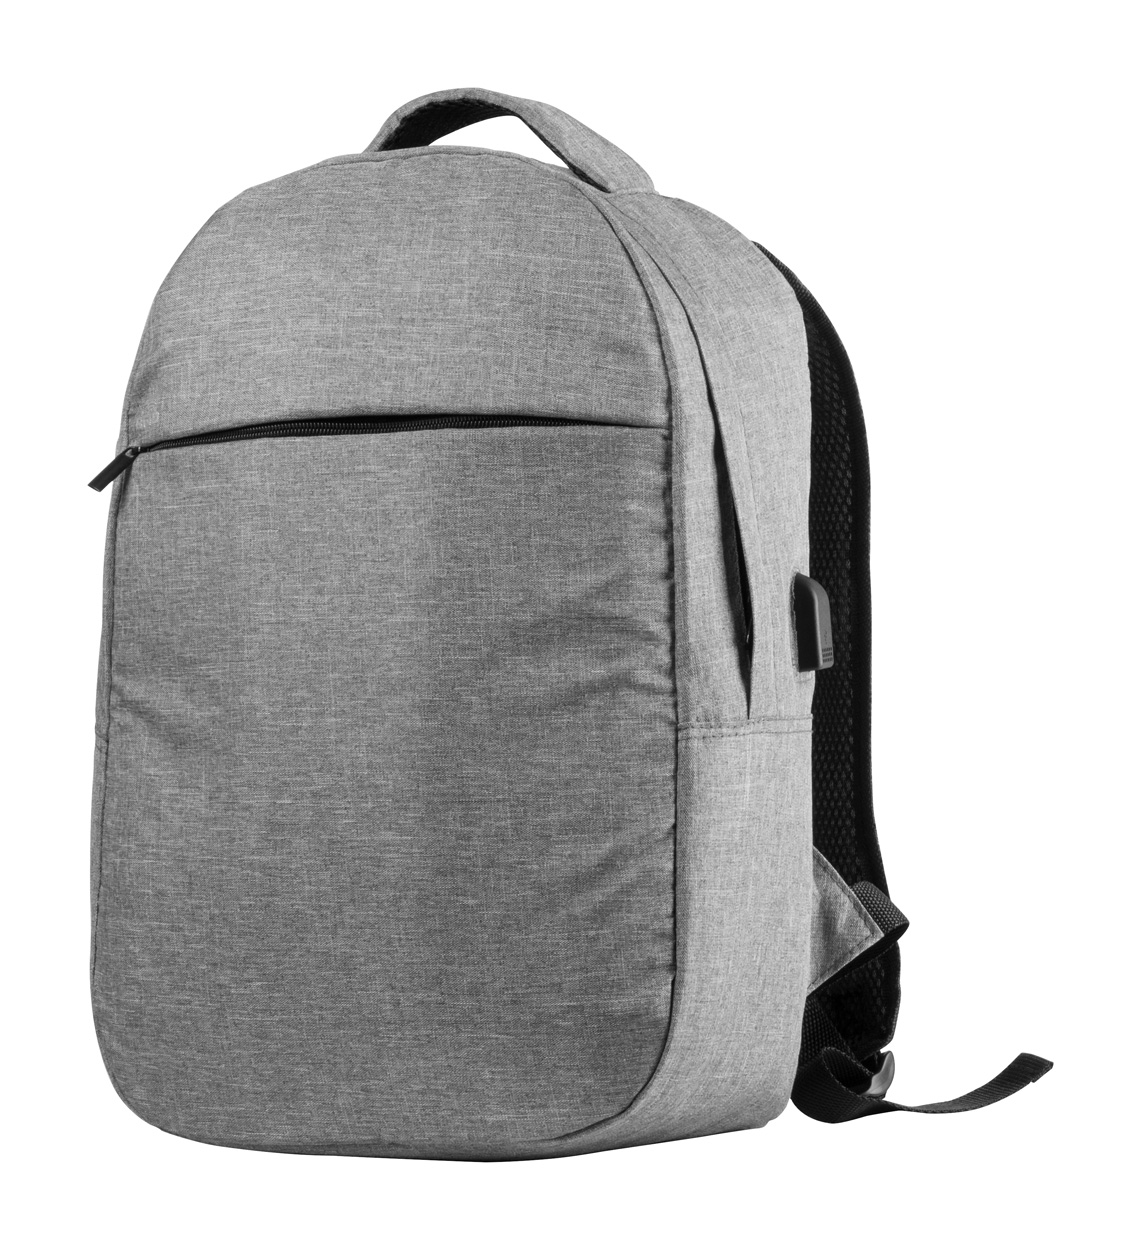 Promo  Rigal backpack